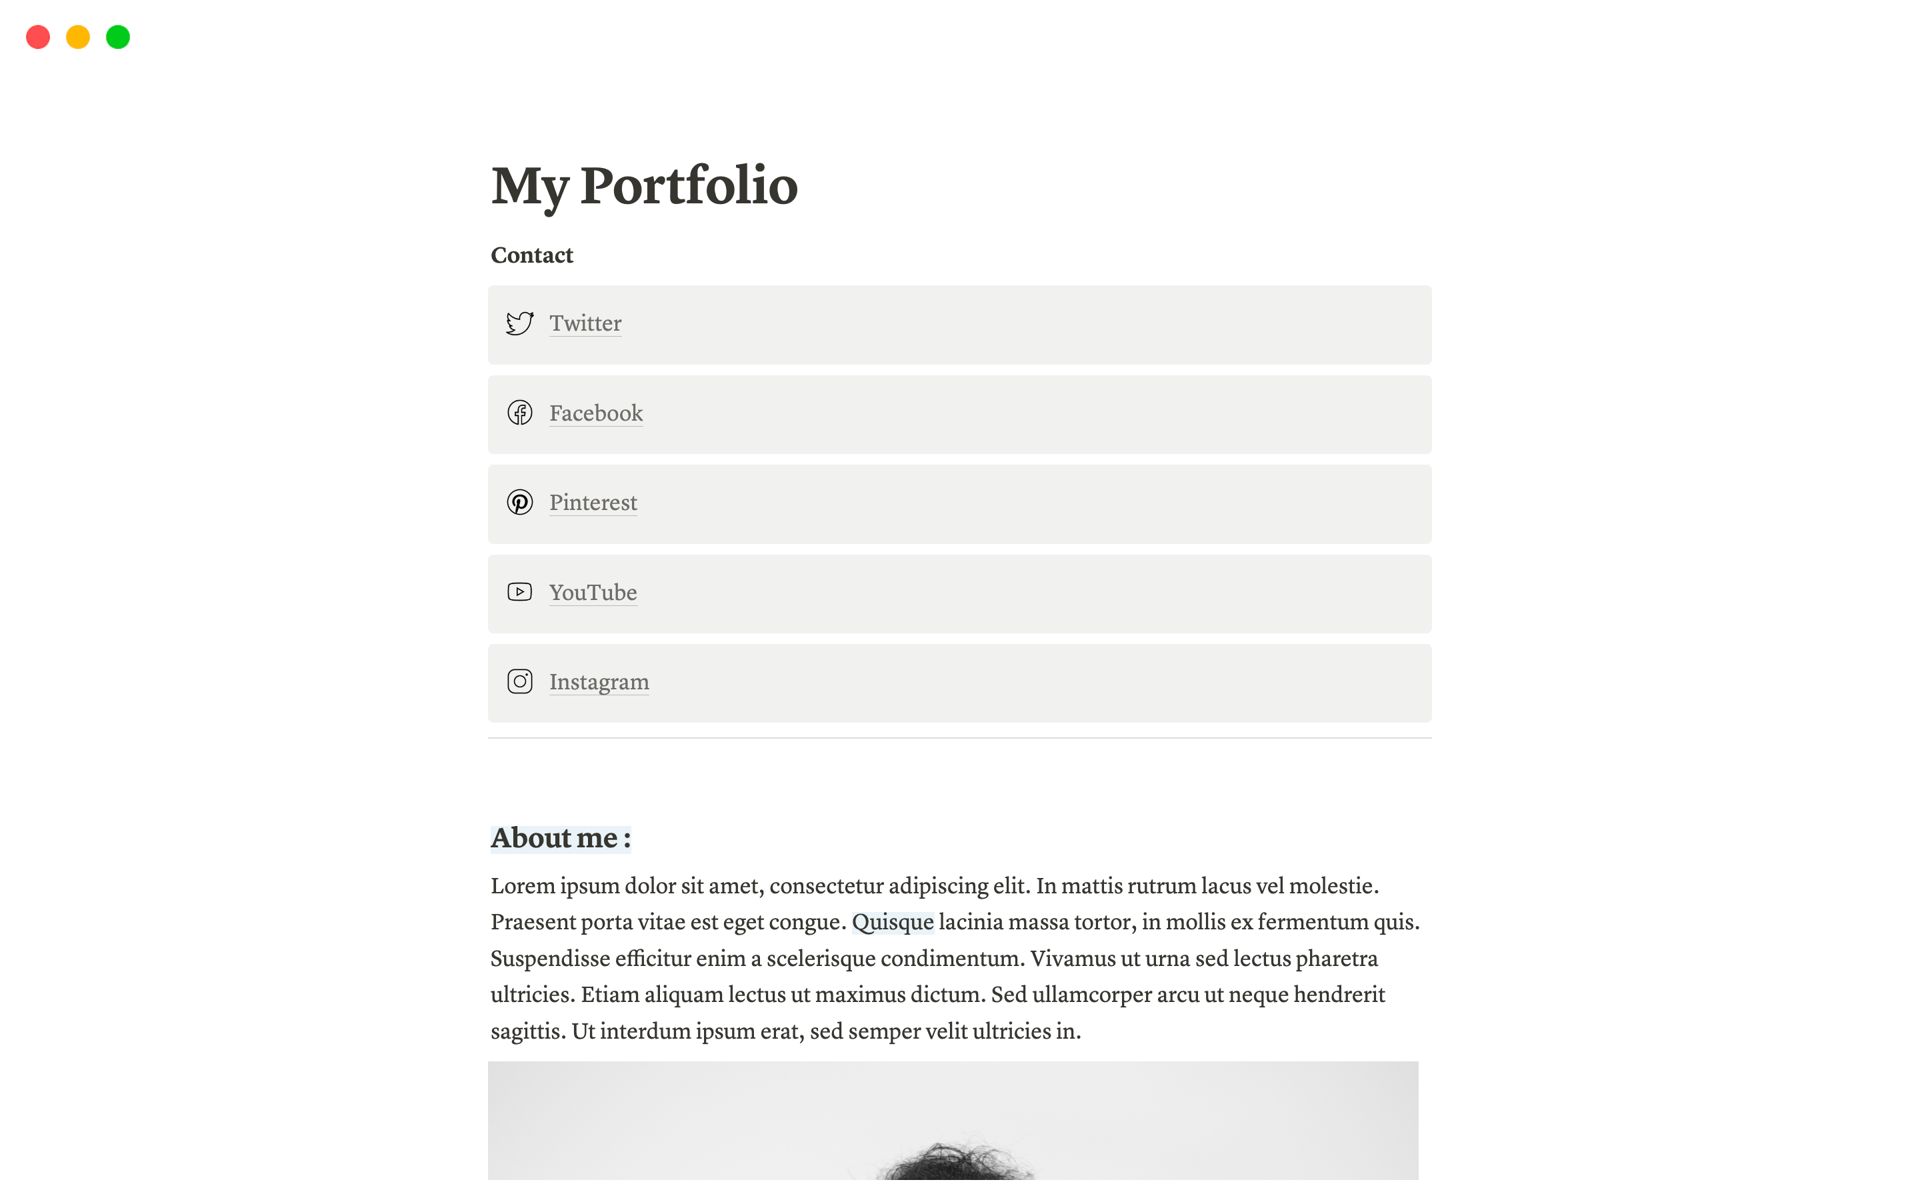 This is a portfolio website template.